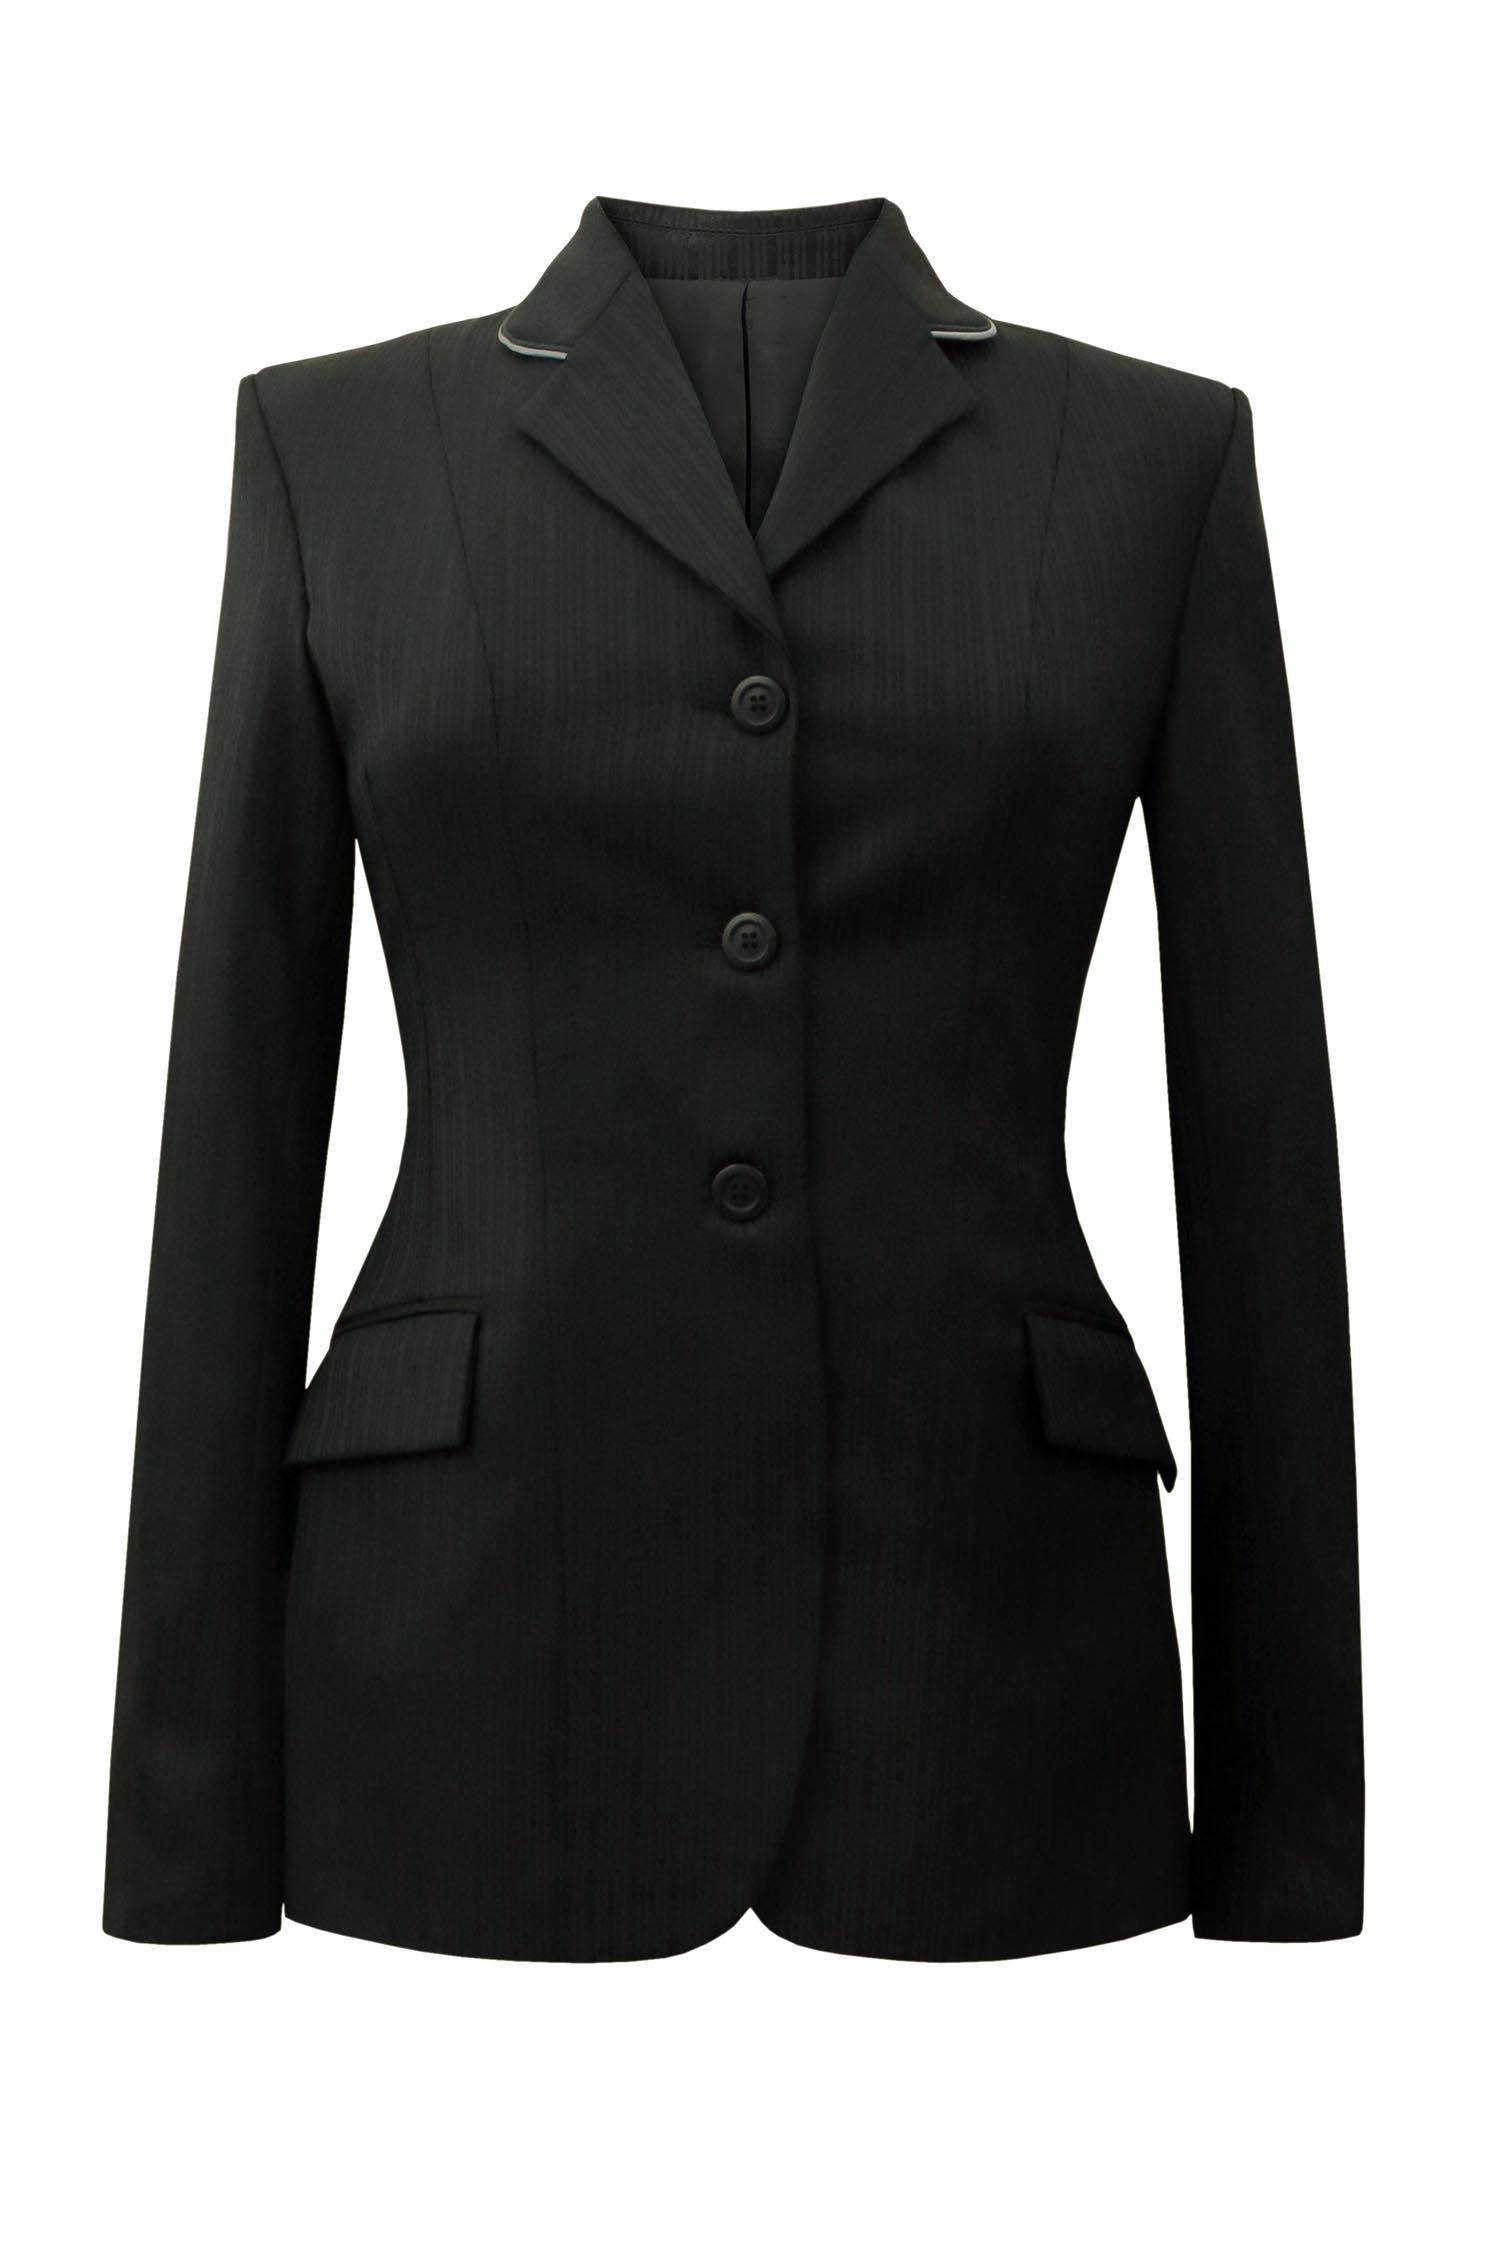 Black variant stripe wool jacket with high sheen with grey piping.